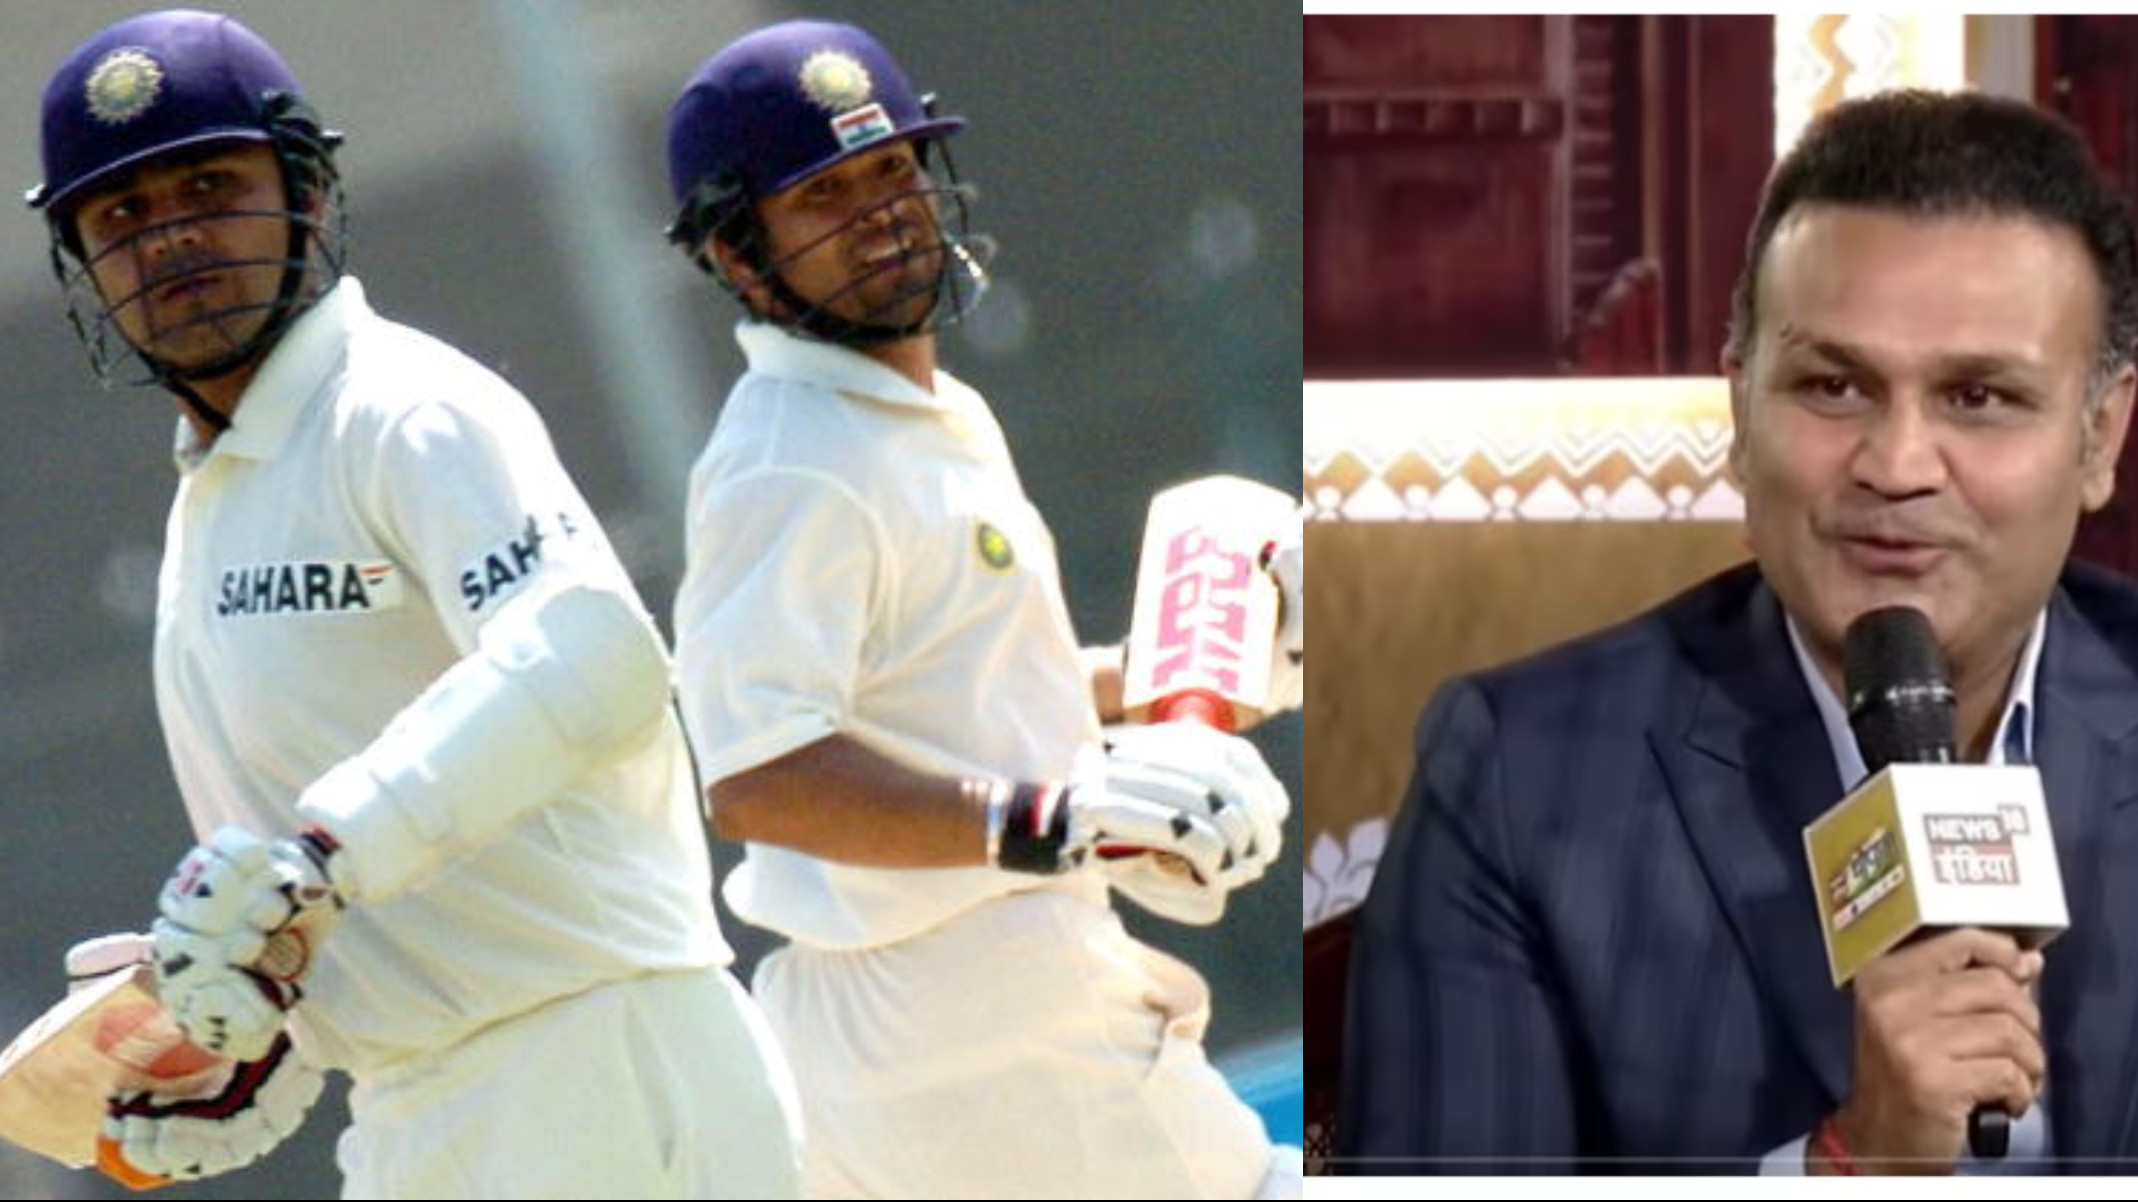 “I will hit you bat”- Sehwag recalls Sachin Tendulkar scolding him for wanting to hit a six on 295 in Multan Test